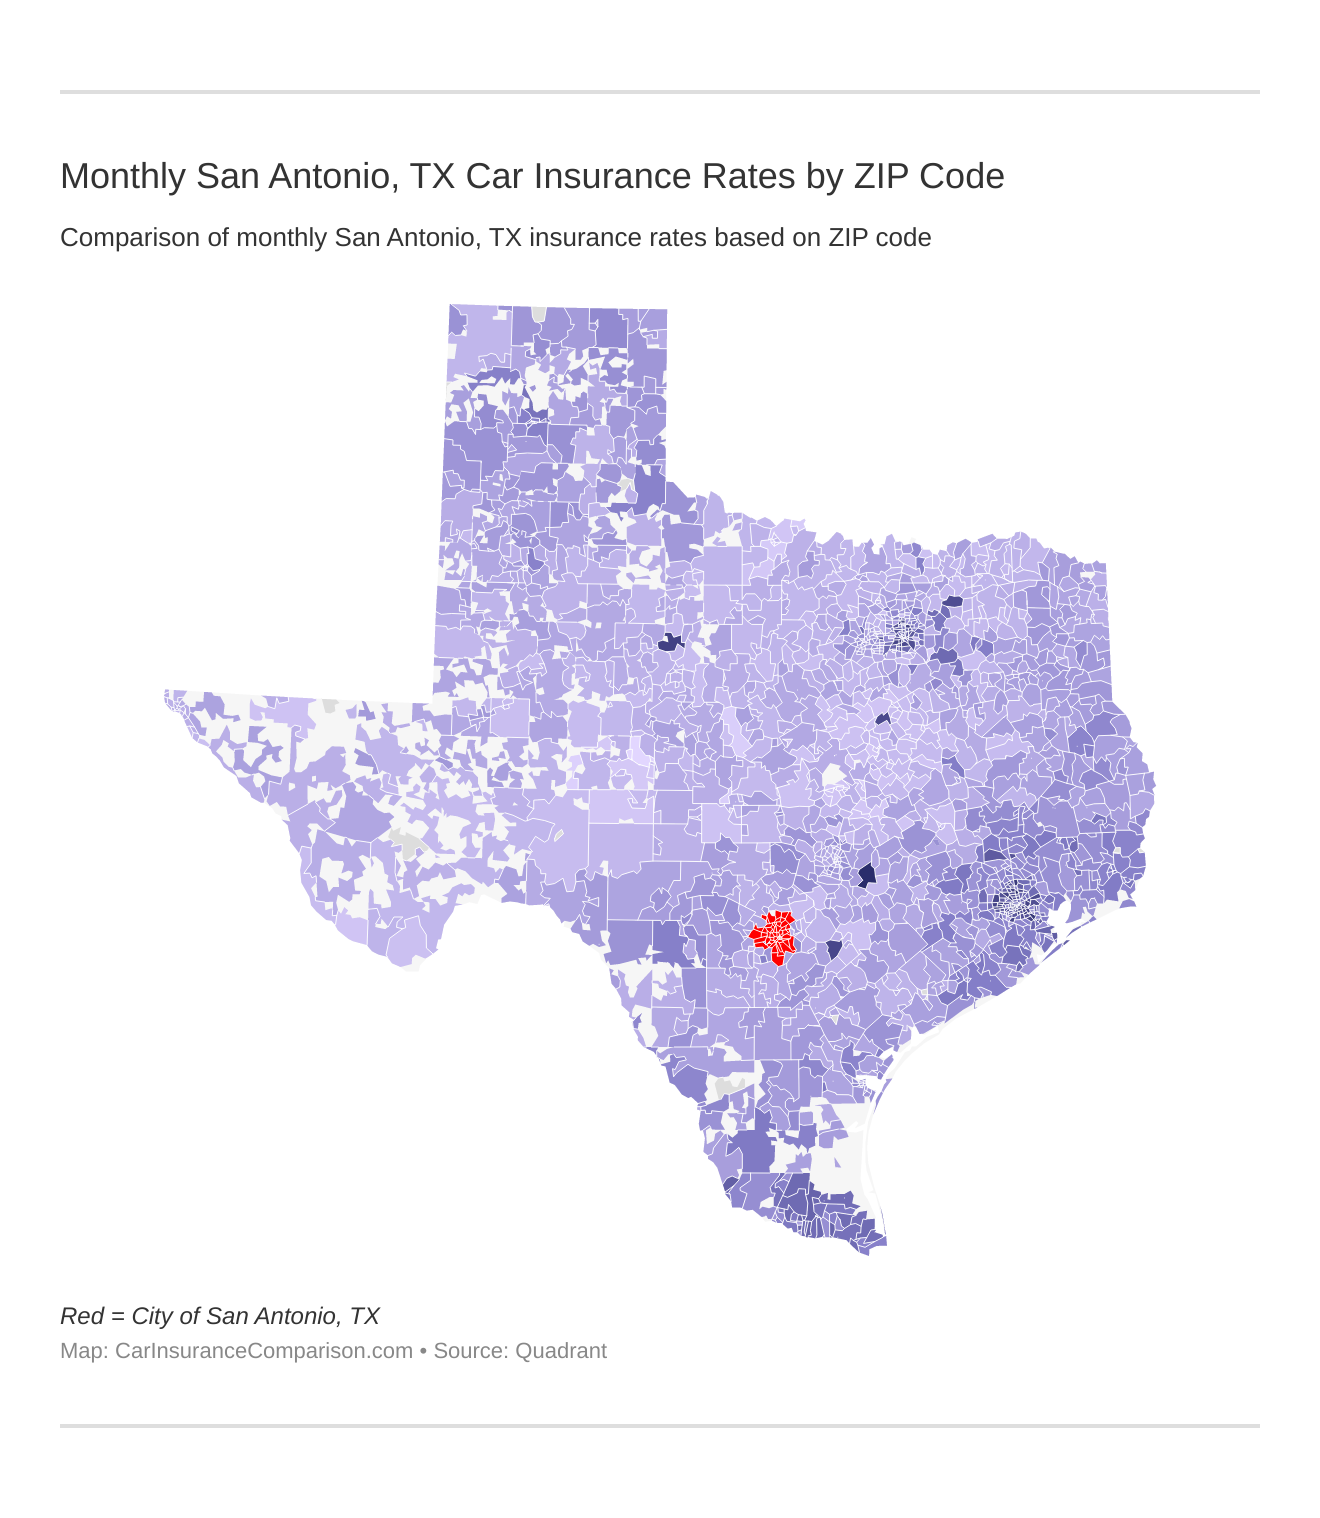 Monthly San Antonio, TX Car Insurance Rates by ZIP Code